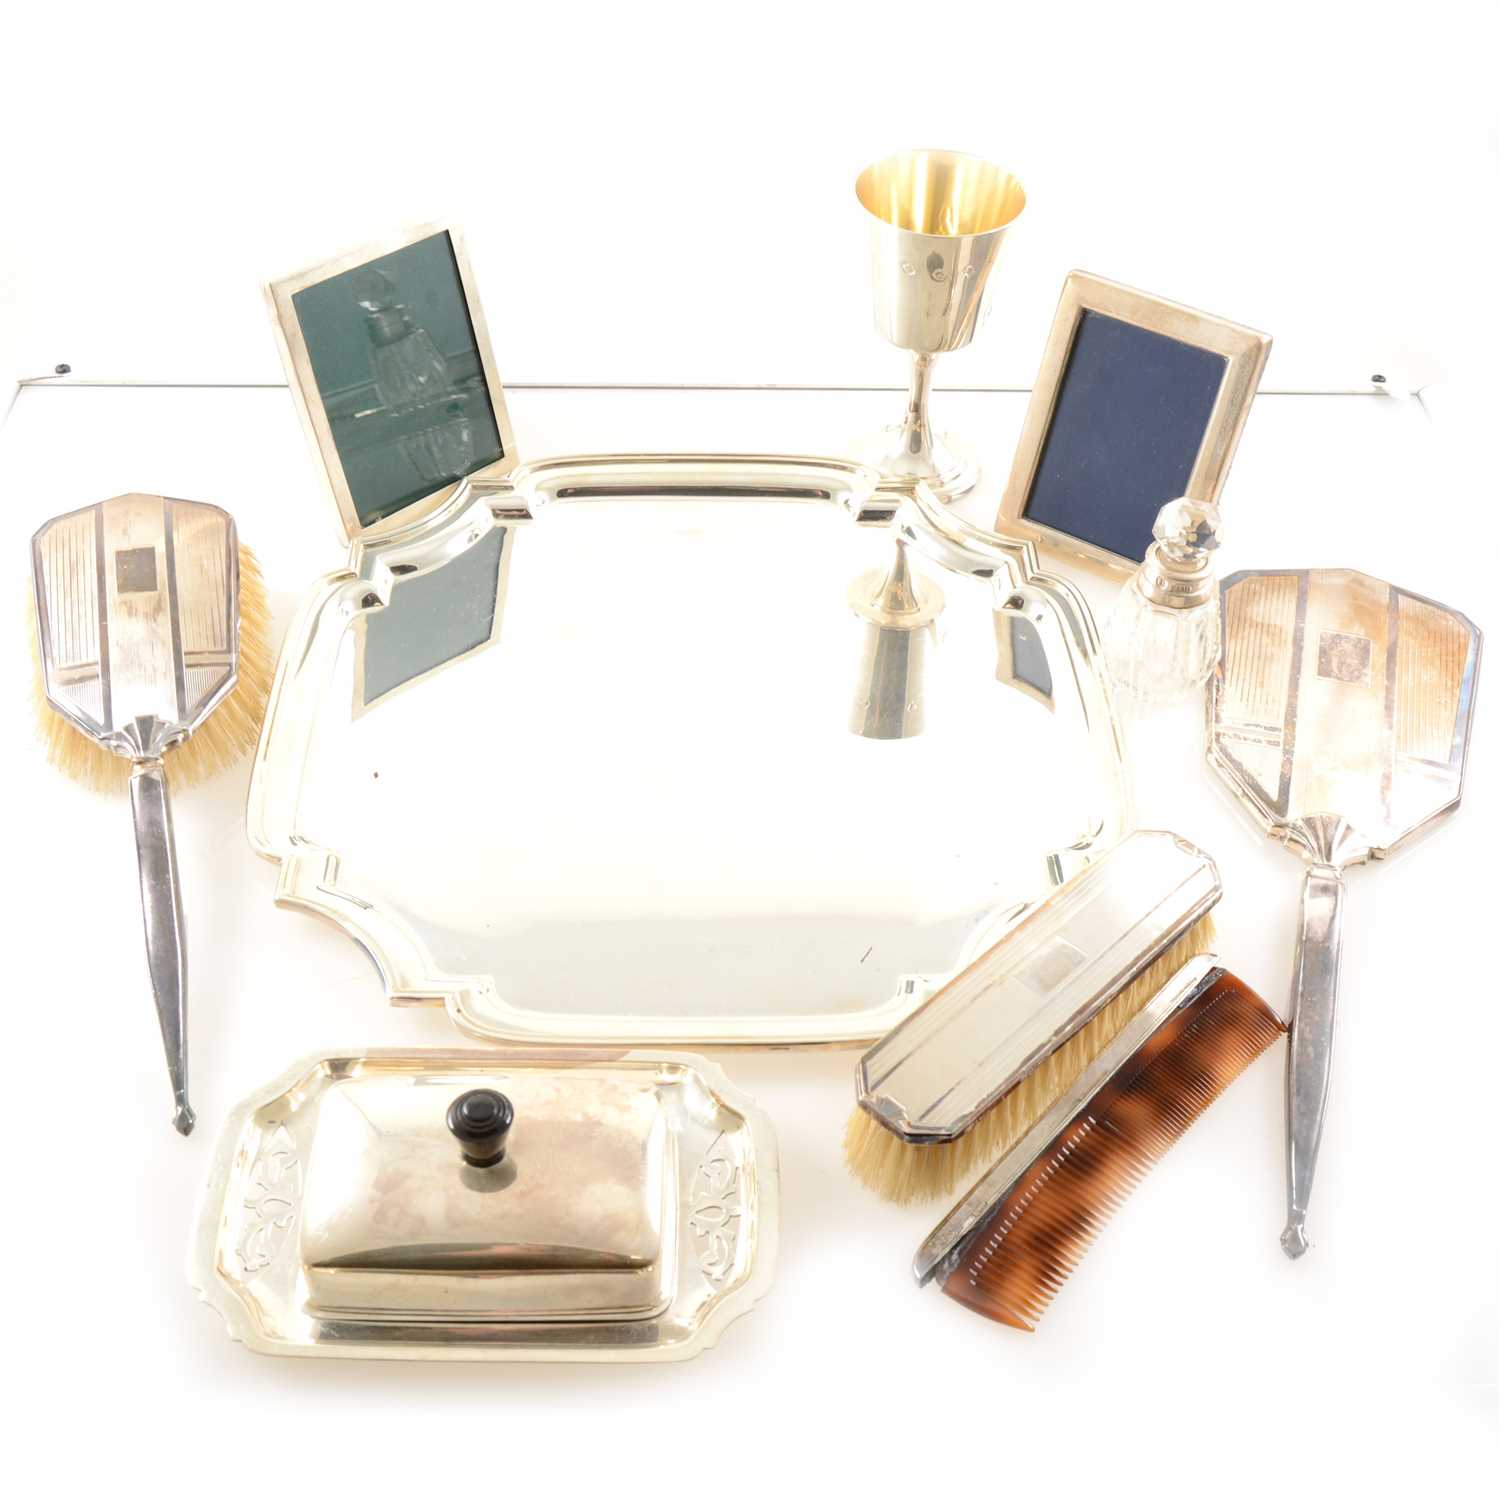 Lot 223 - A silver backed dressing table set, silver jubilee goblet 1977 , two photograph frames - one silver, one plated, silver topped smelling salts bottle and plated salver.